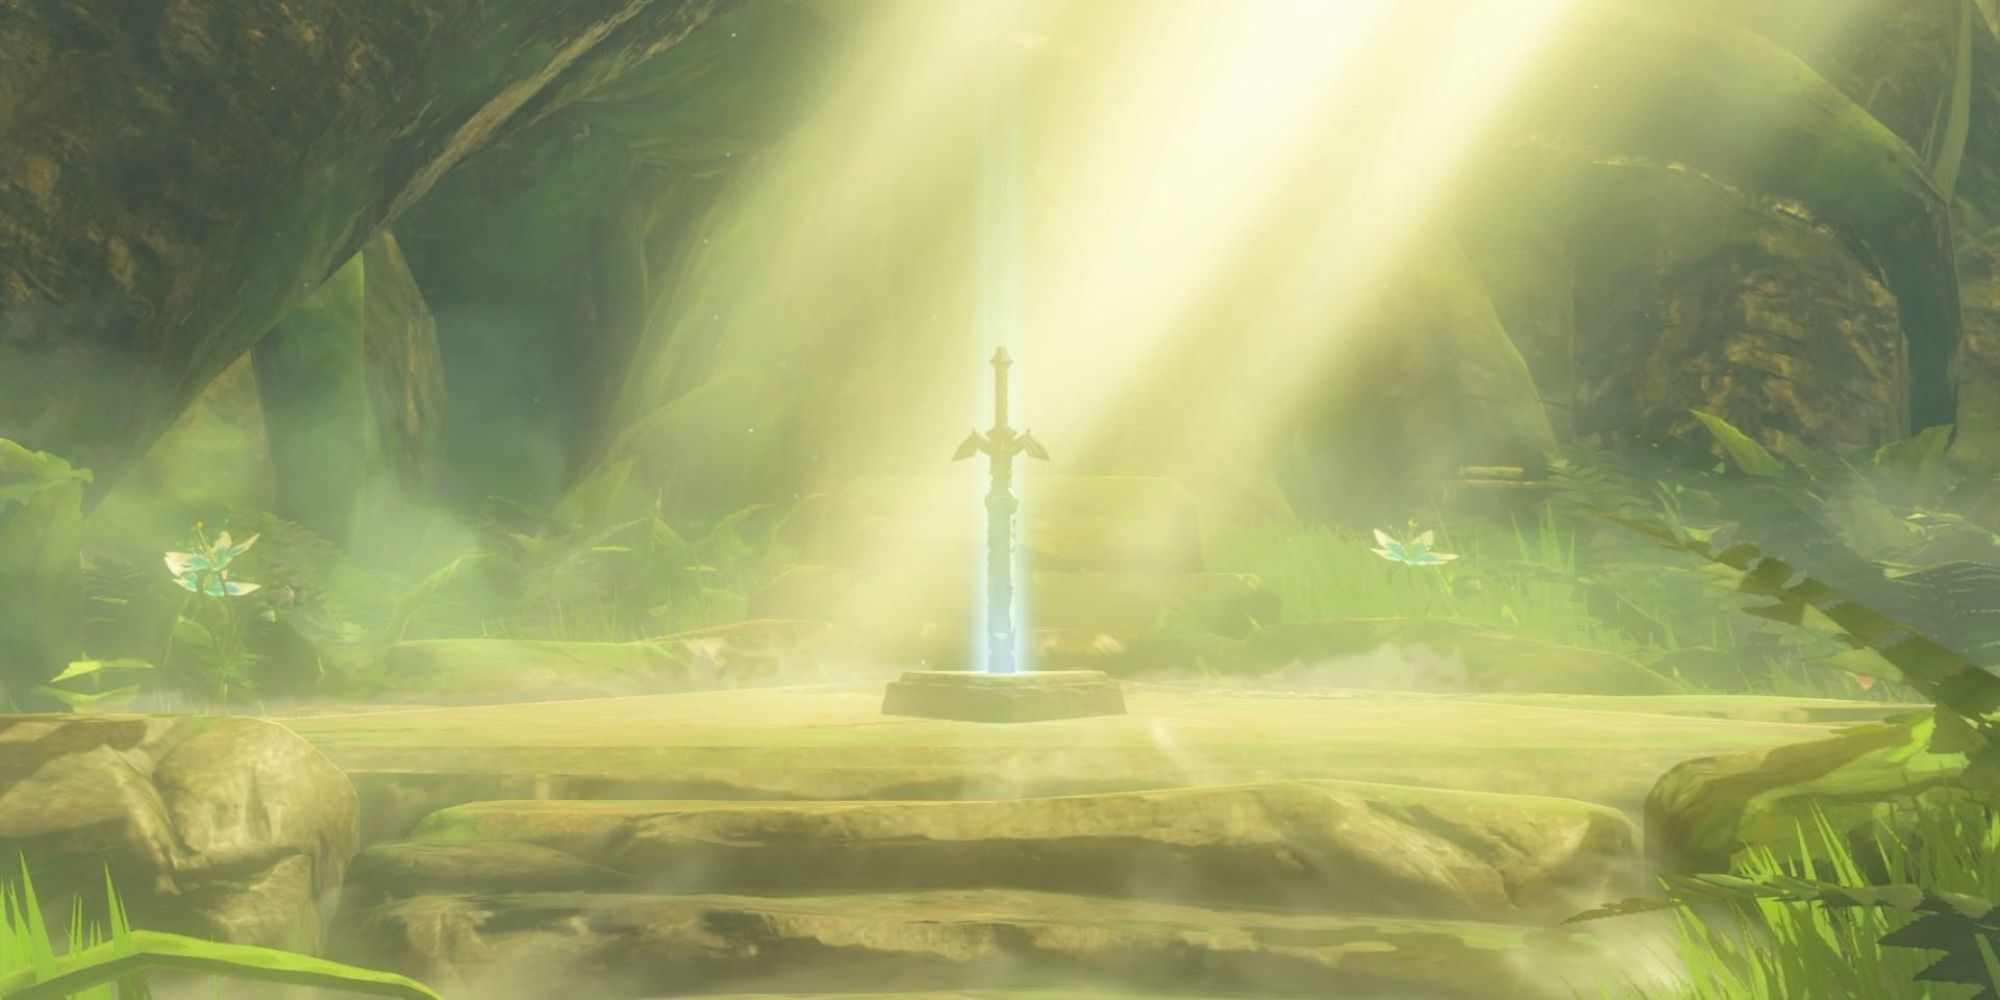 The Master Sword in its stone in Breath of the Wild.